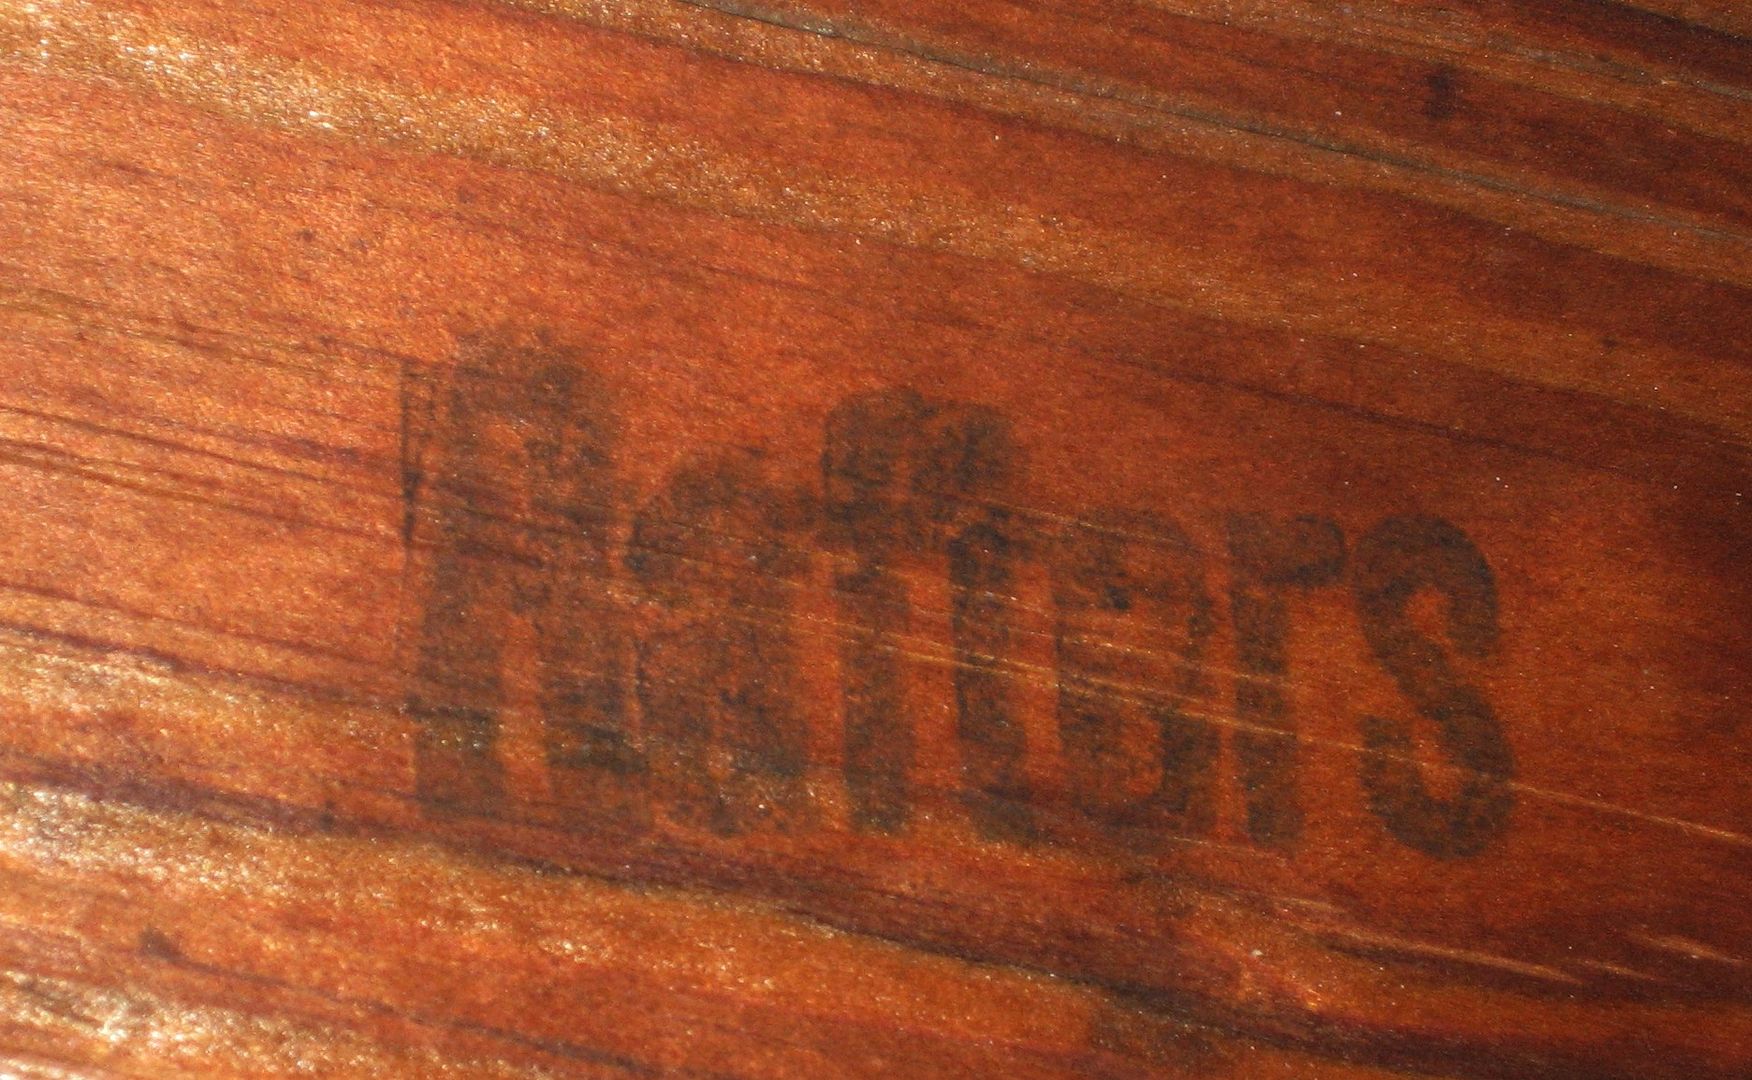 Aladdin used a different marking system on their lumber, such as this.